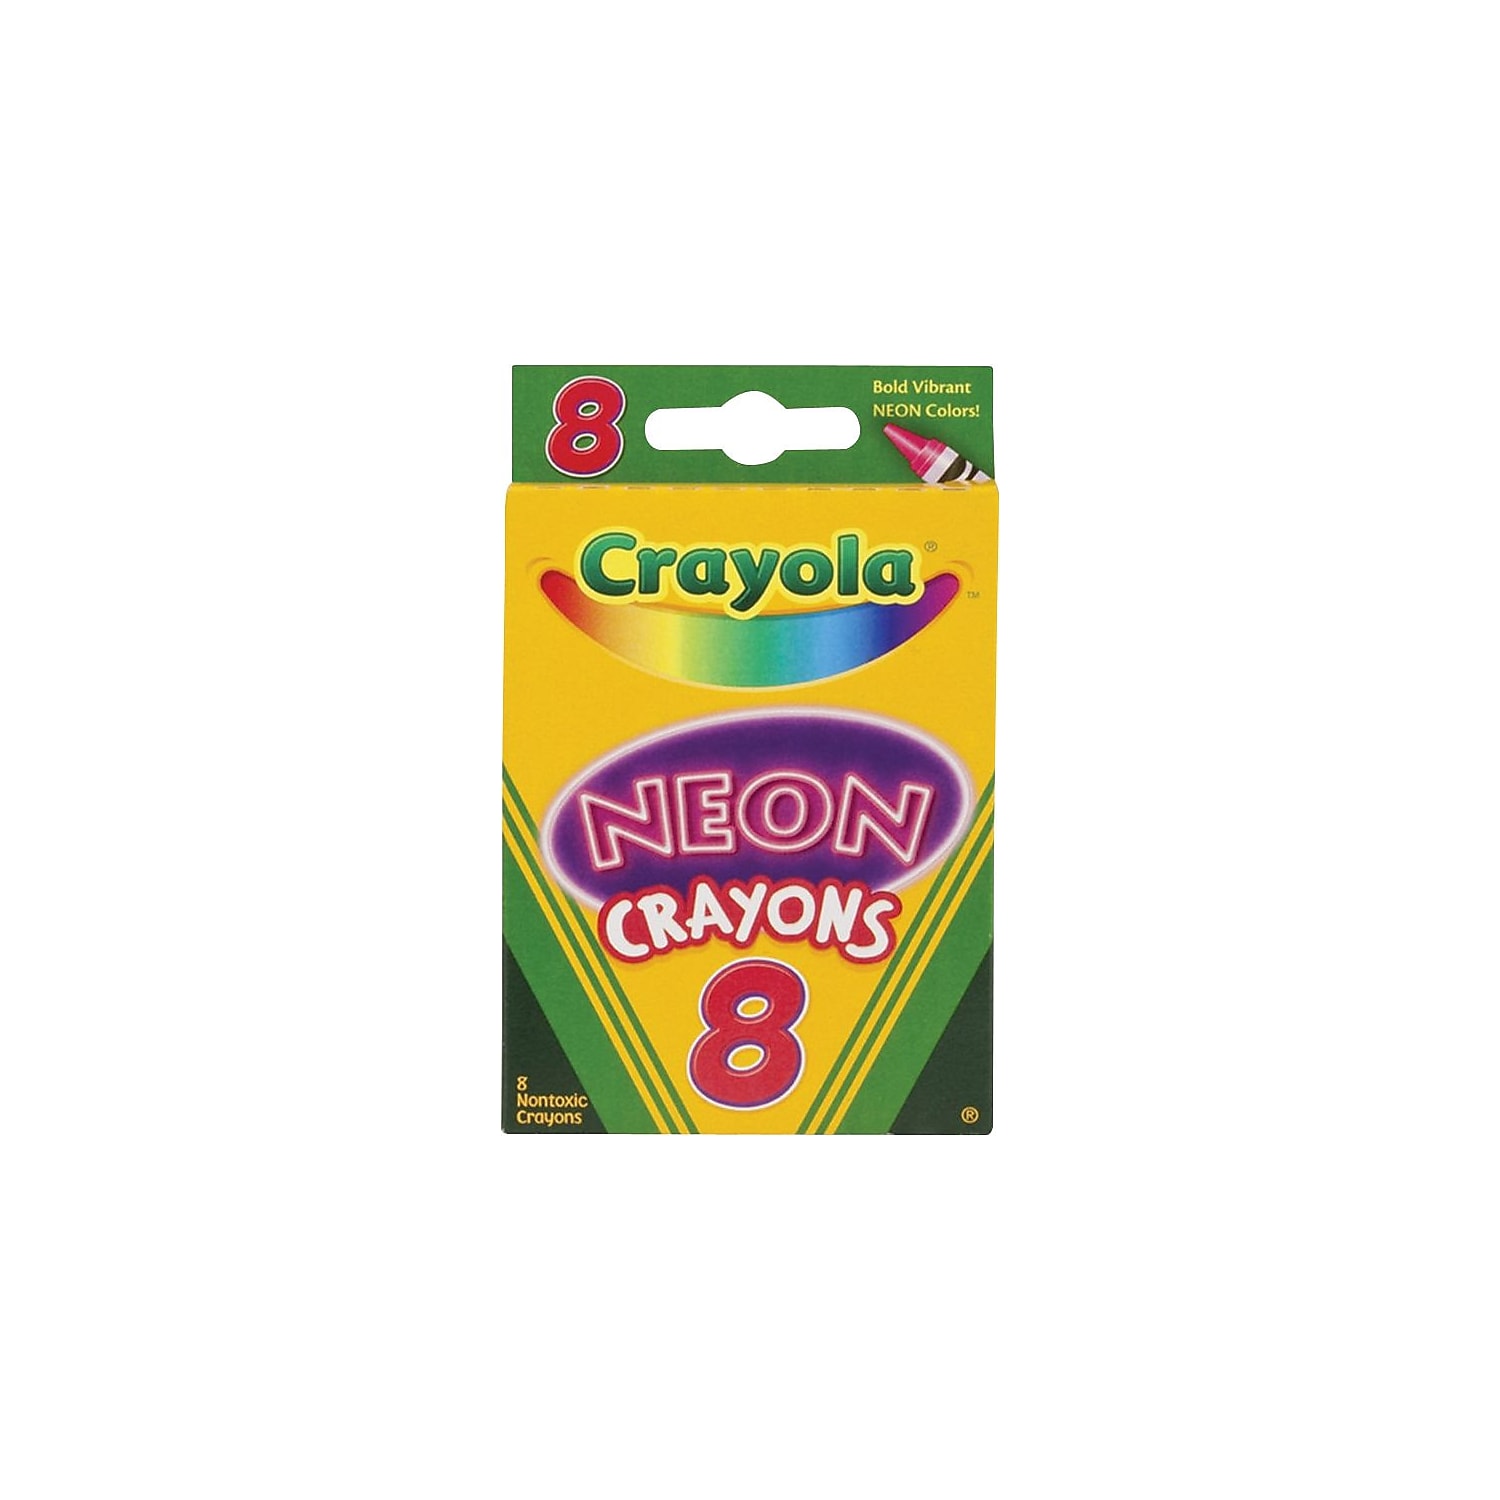 Crayola Non-Toxic Crayon, Assorted Neon Color, Pack Of 8 - image 3 of 4